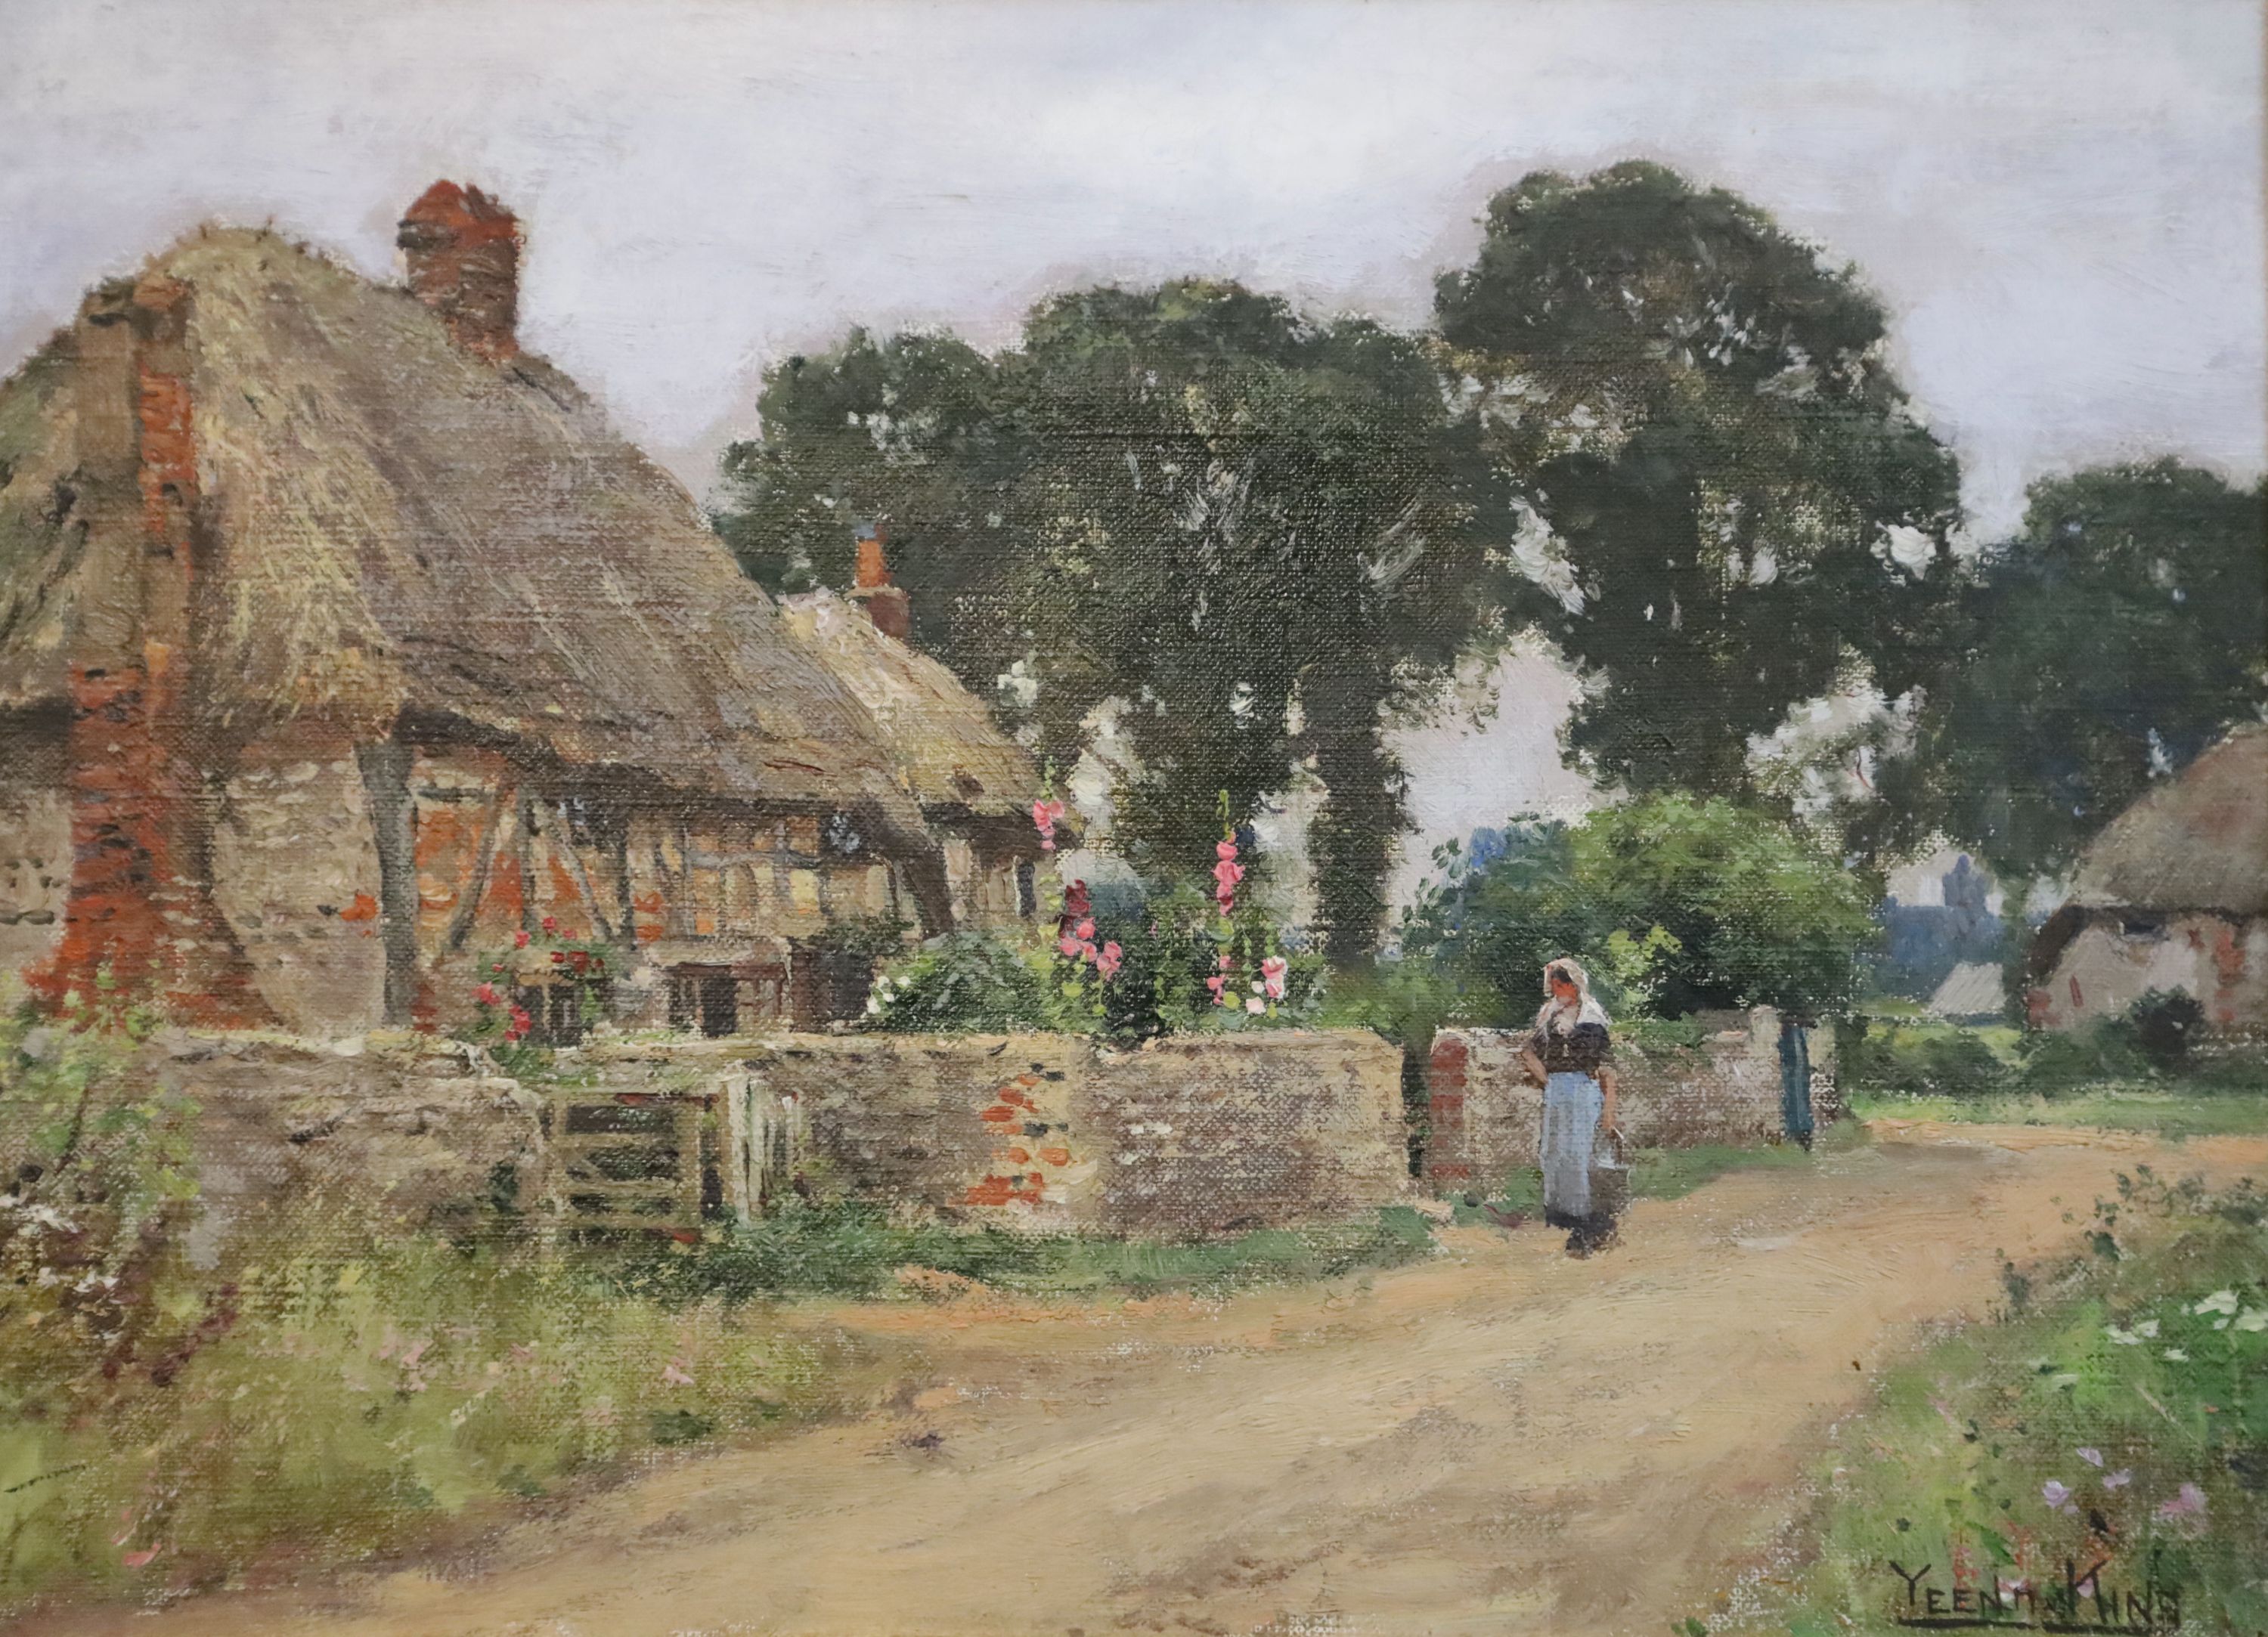 Miss Lilian Yeend-King (Mrs Freemantle b.1882) Woman passing a thatched cottage and woman feeding geese beside a timbered house 11 x 15